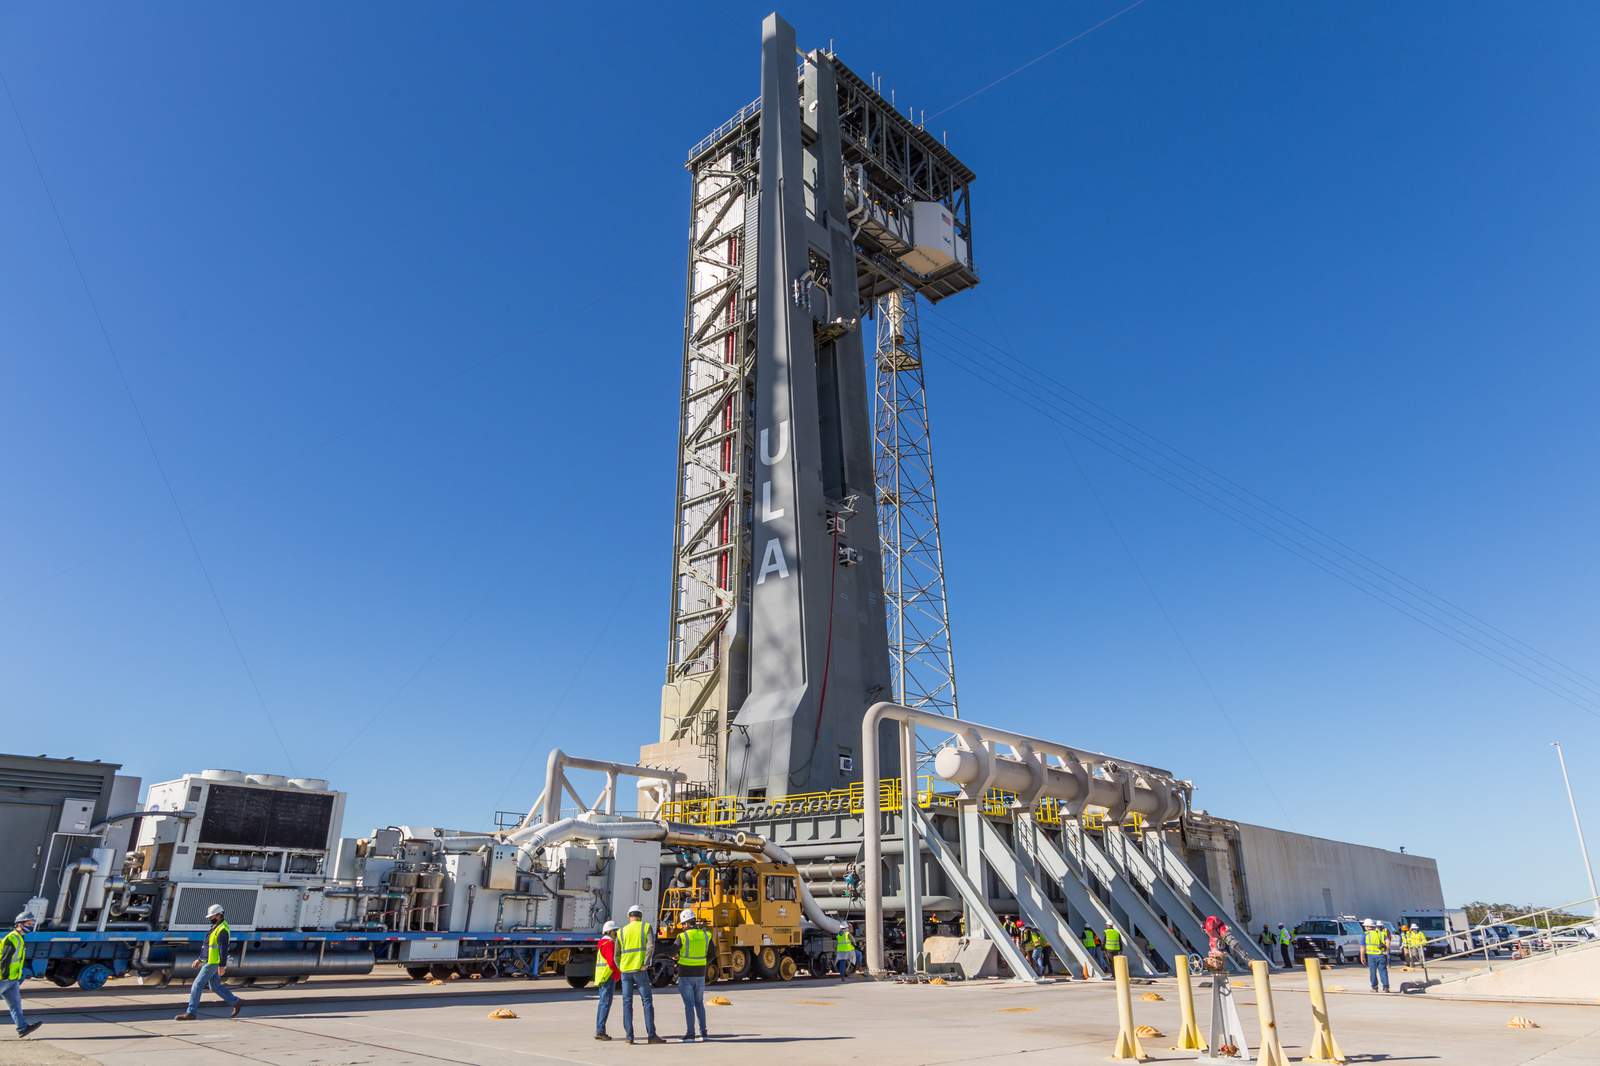 Preps for ULA’s new Vulcan rocket continue at Cape Canaveral